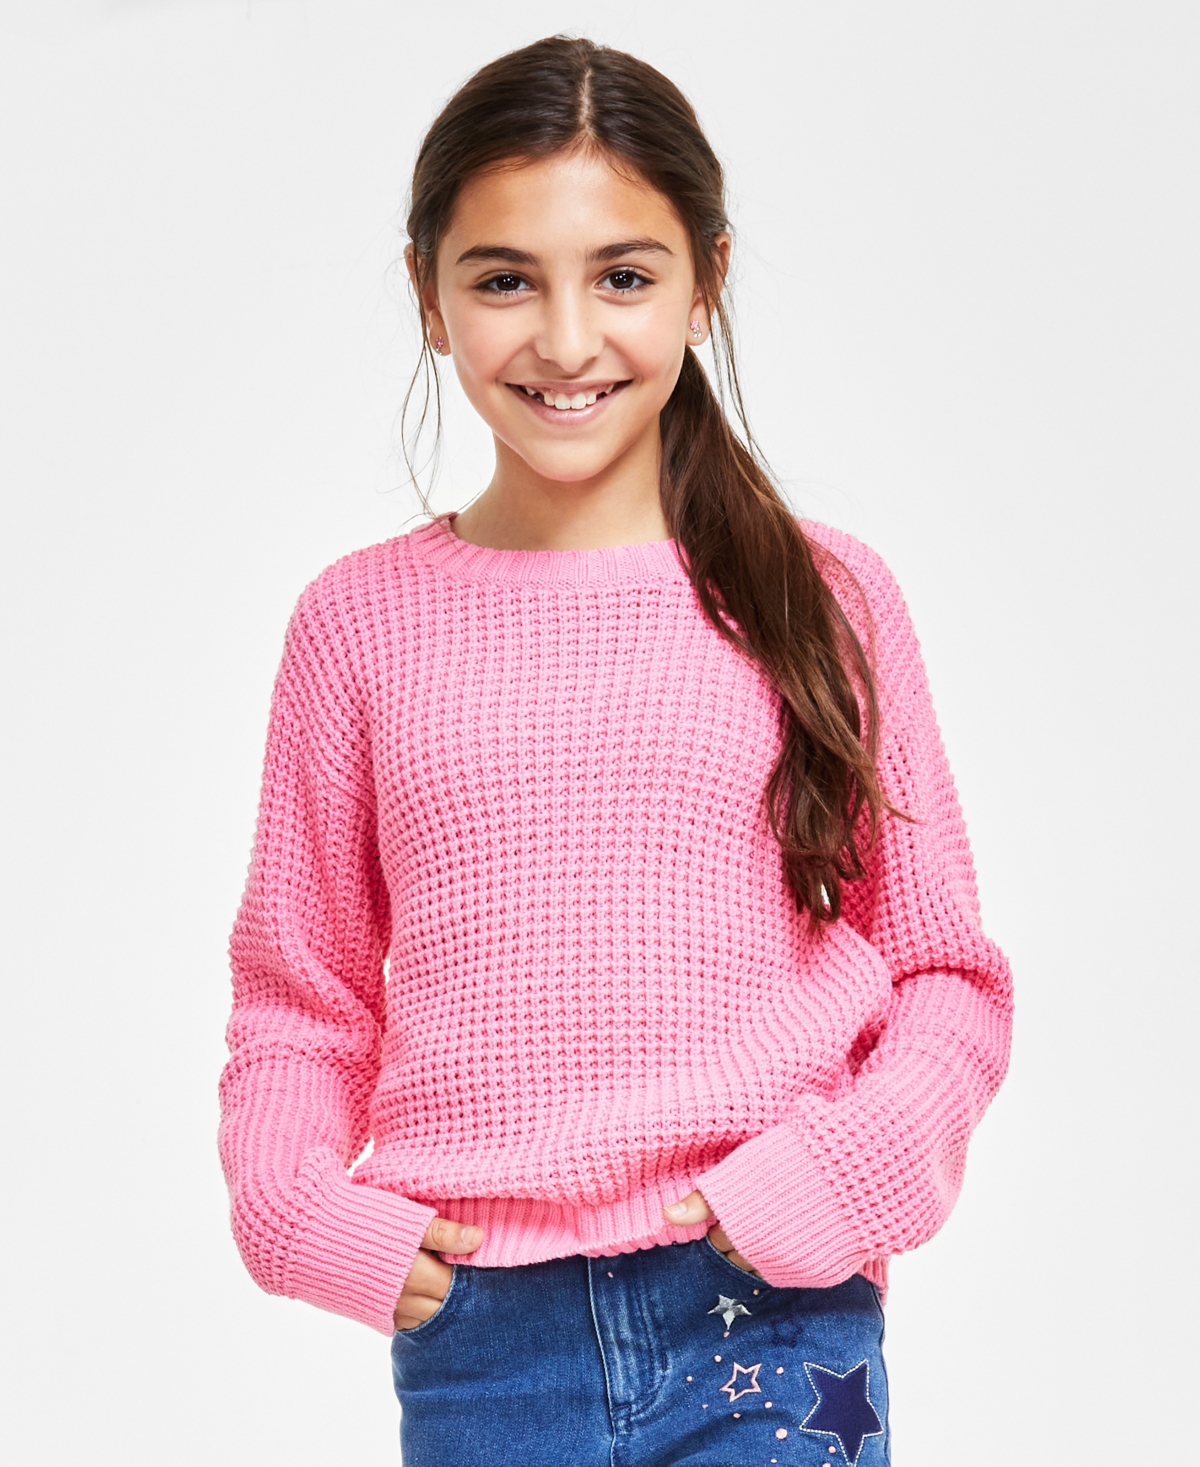 Epic Threads Toddler & Little Girls Solid Crewneck Sweater, Created For Macy's In Sweetheart